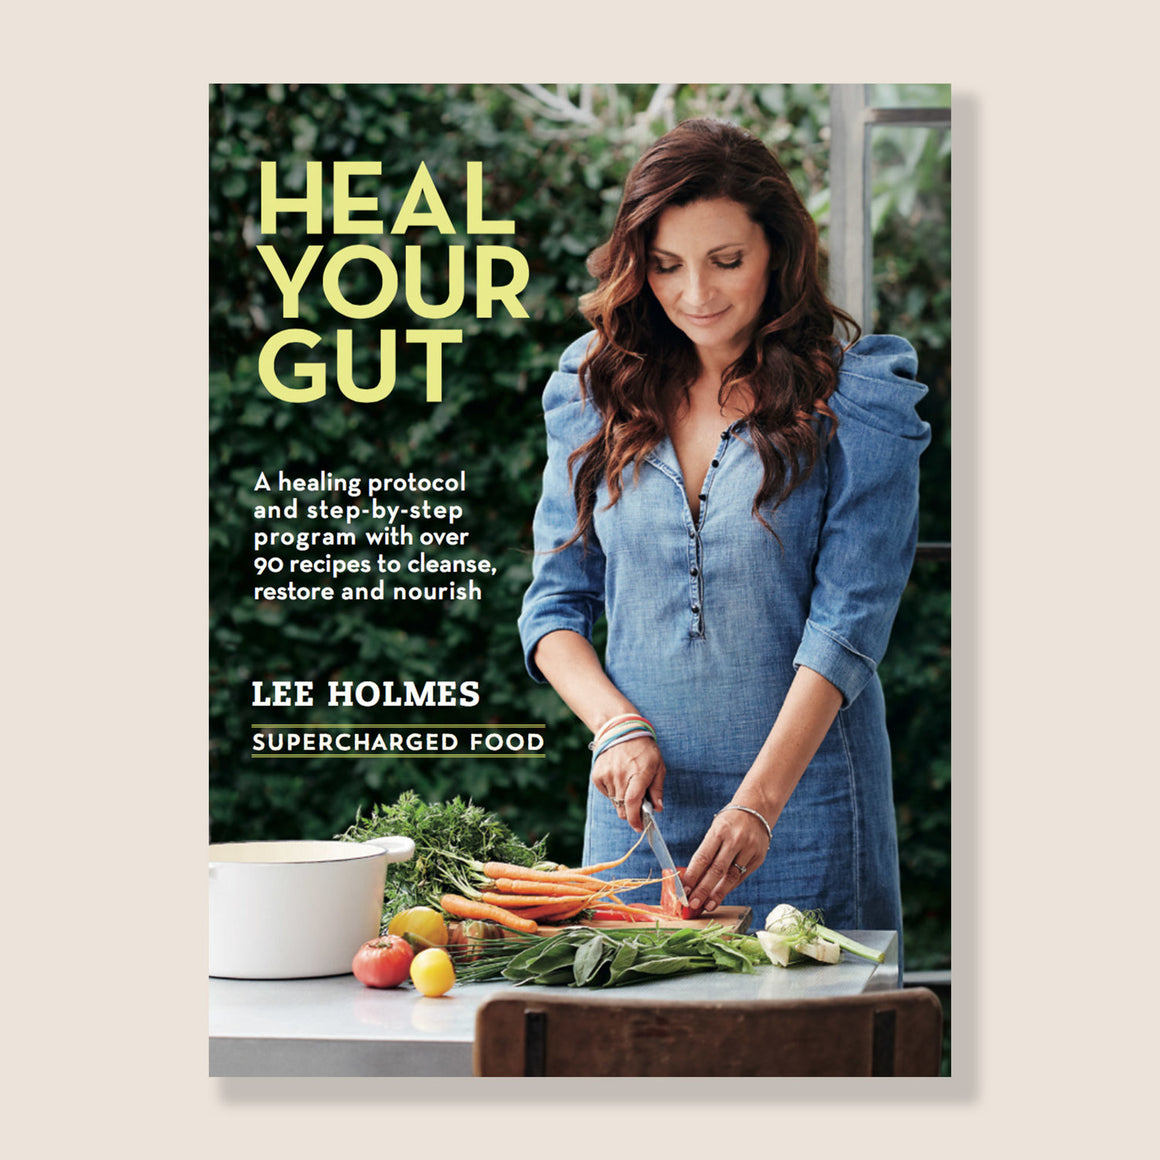 HEAL YOUR GUT BOOK BY LEE HOLMES